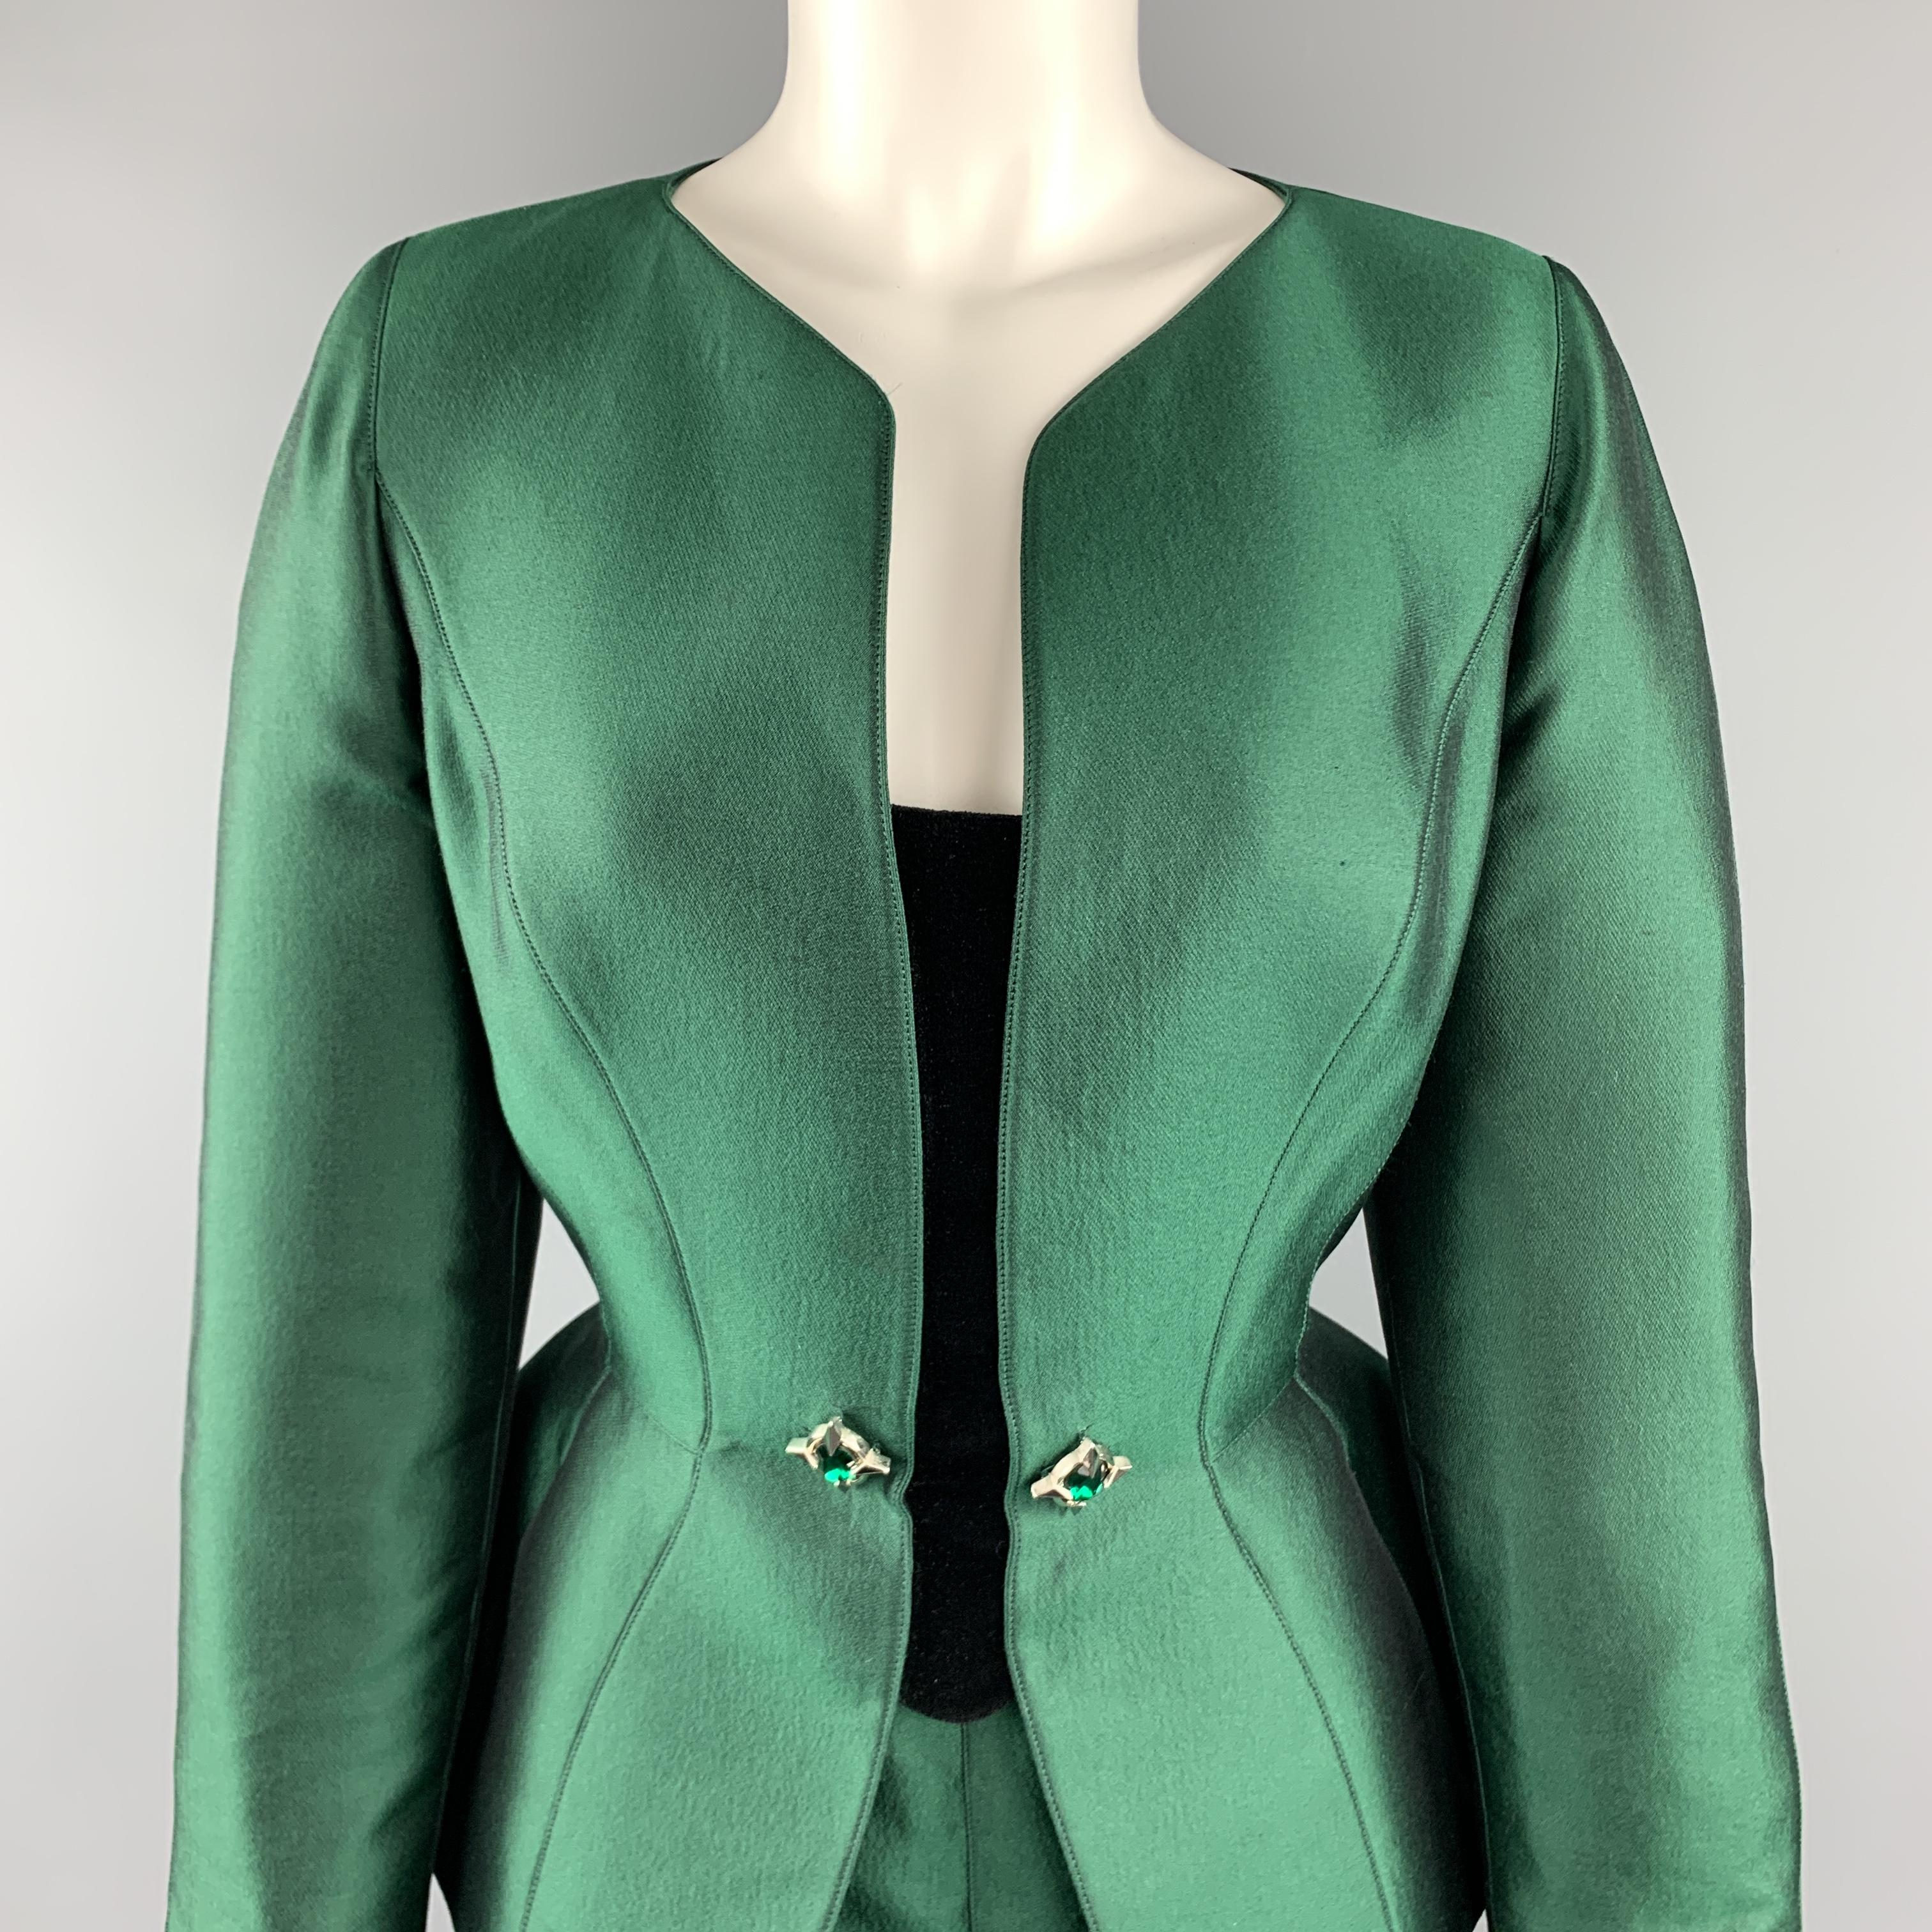 This gorgeous vintage 1980's THIERRY MUGLER skirt suit comes in forest green structured wilk wool blend satin and includes a collarless neckline, peplum, black velvet rhinestone embellished jacket and matching pencil skirt. Minor wear. Made in